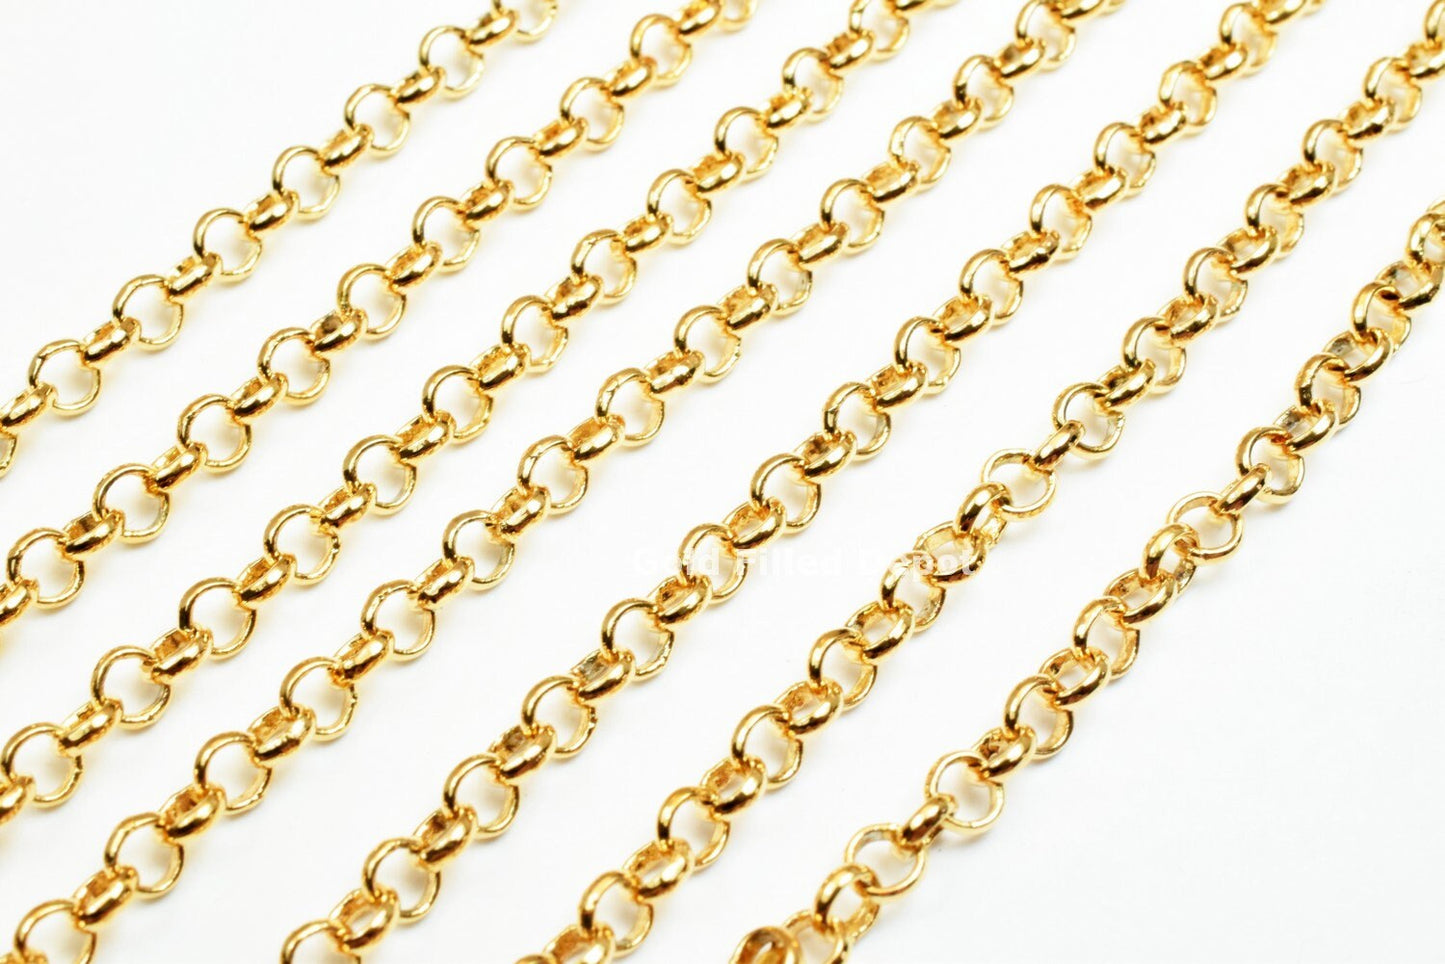 18K Gold Filled Rolo Cable Link Chain personalize necklace 3 feet Width 3.5mm Thickness 1mm findings for Jewelry Supplies GFC007 wholesale